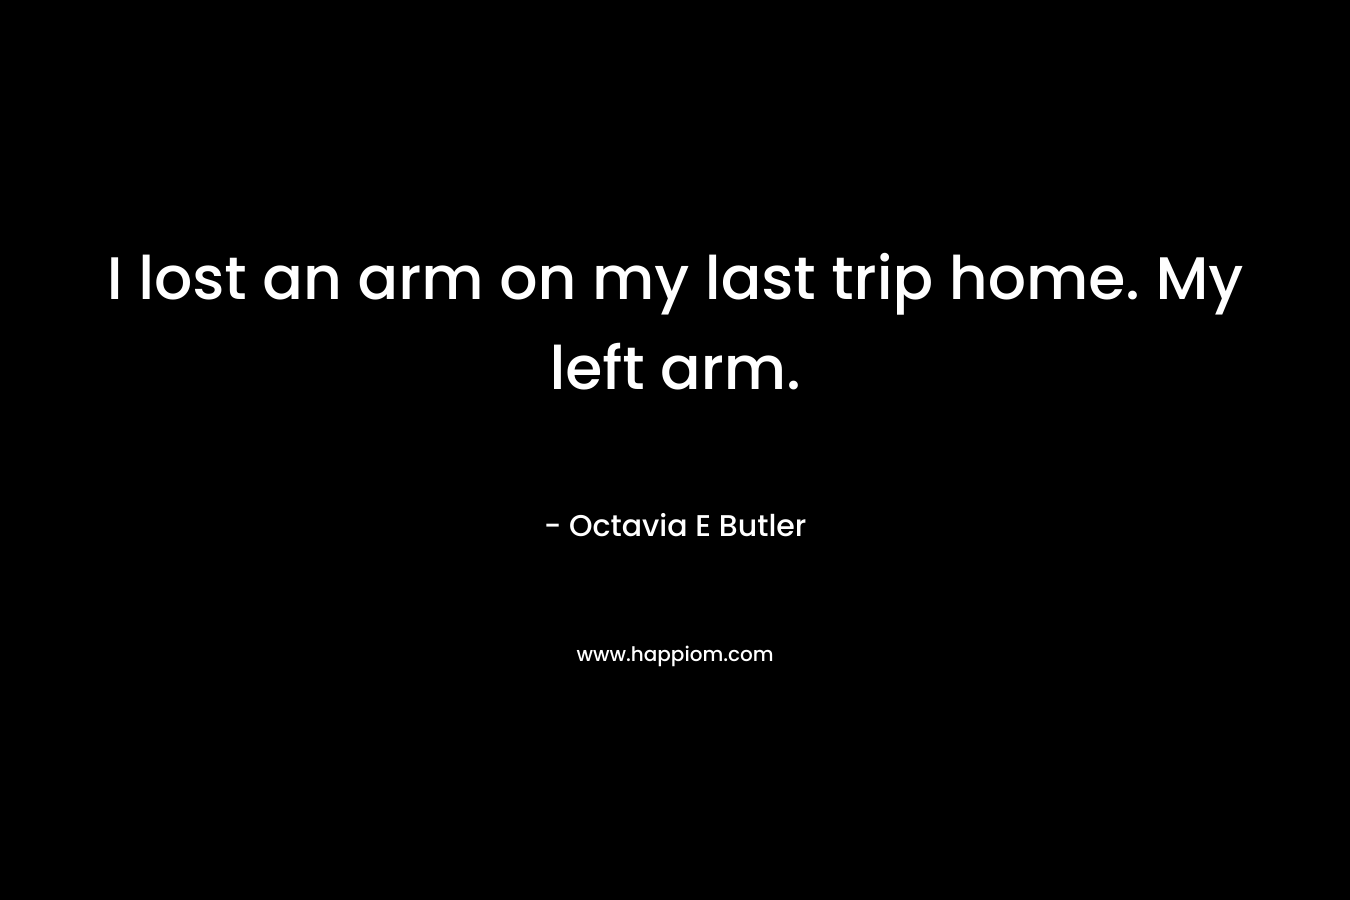 I lost an arm on my last trip home. My left arm.